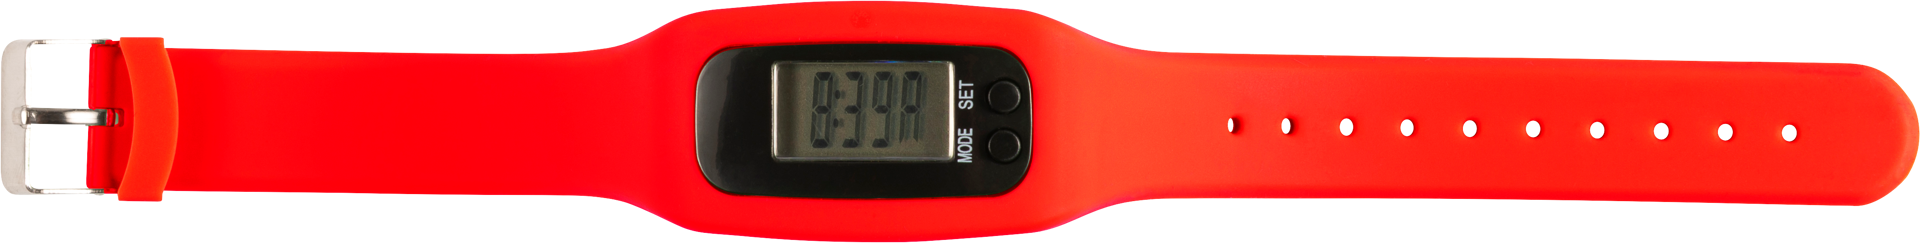 Red pedometer with a black screen 